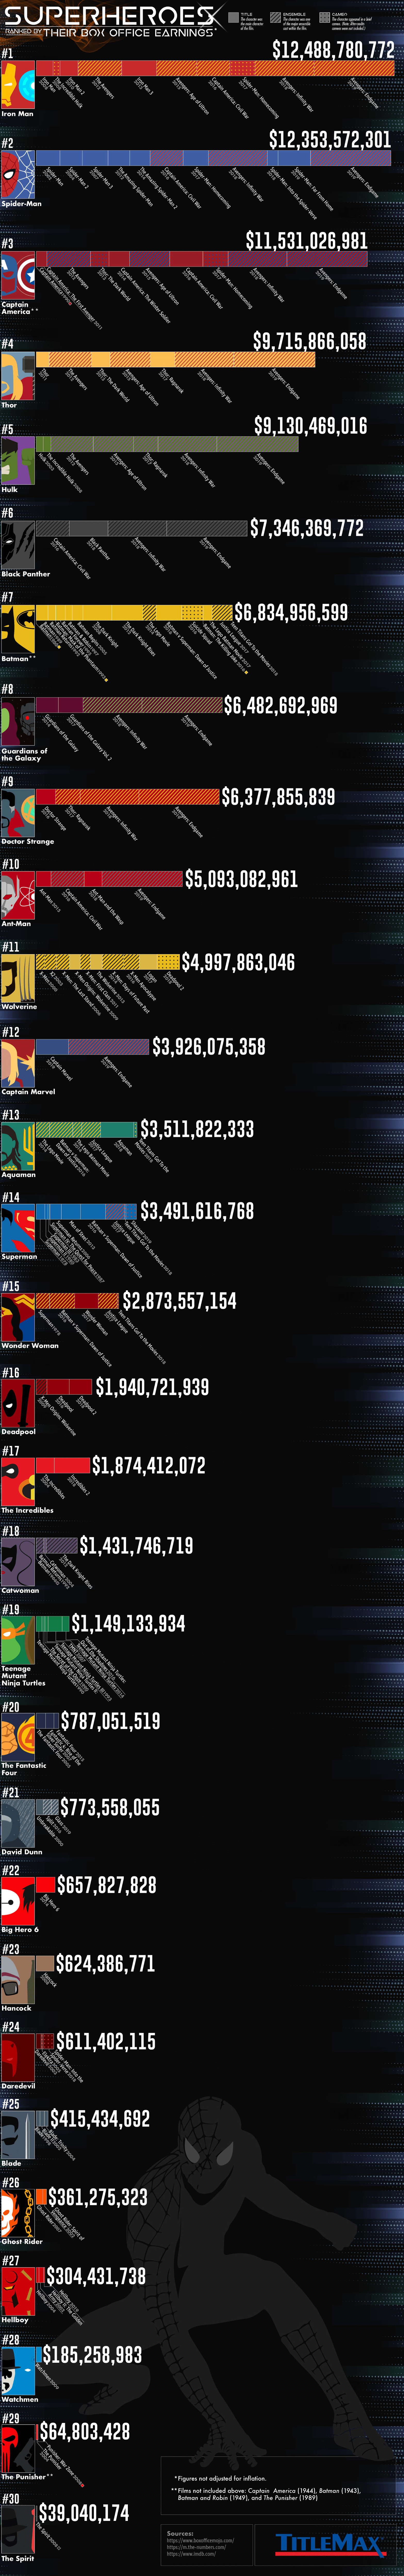 Superheroes Ranked by Their Box Office Earnings | TitleMax